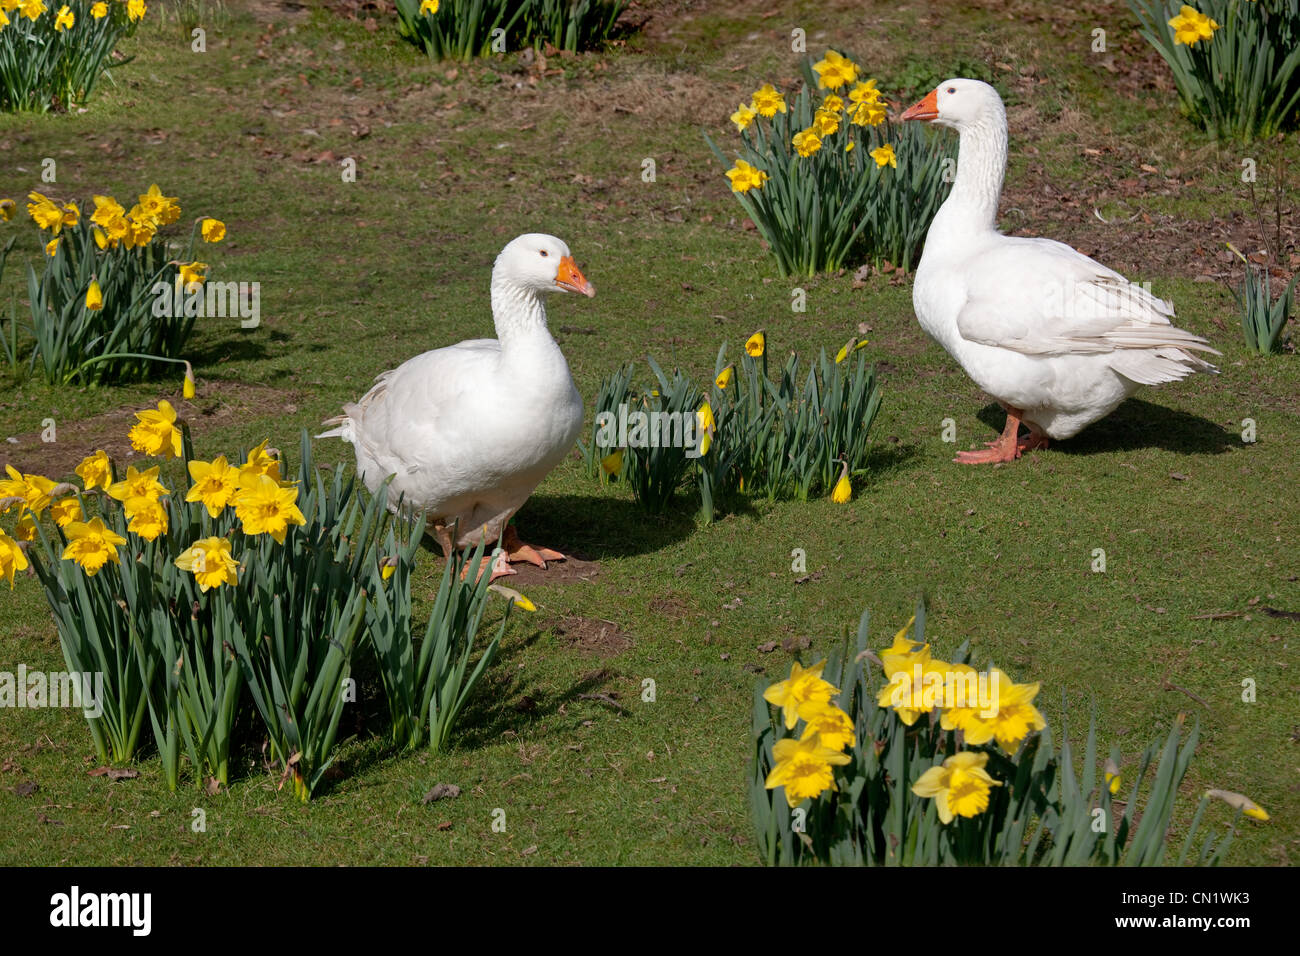 Emden Geese flock and Daffodils in garden Stock Photo